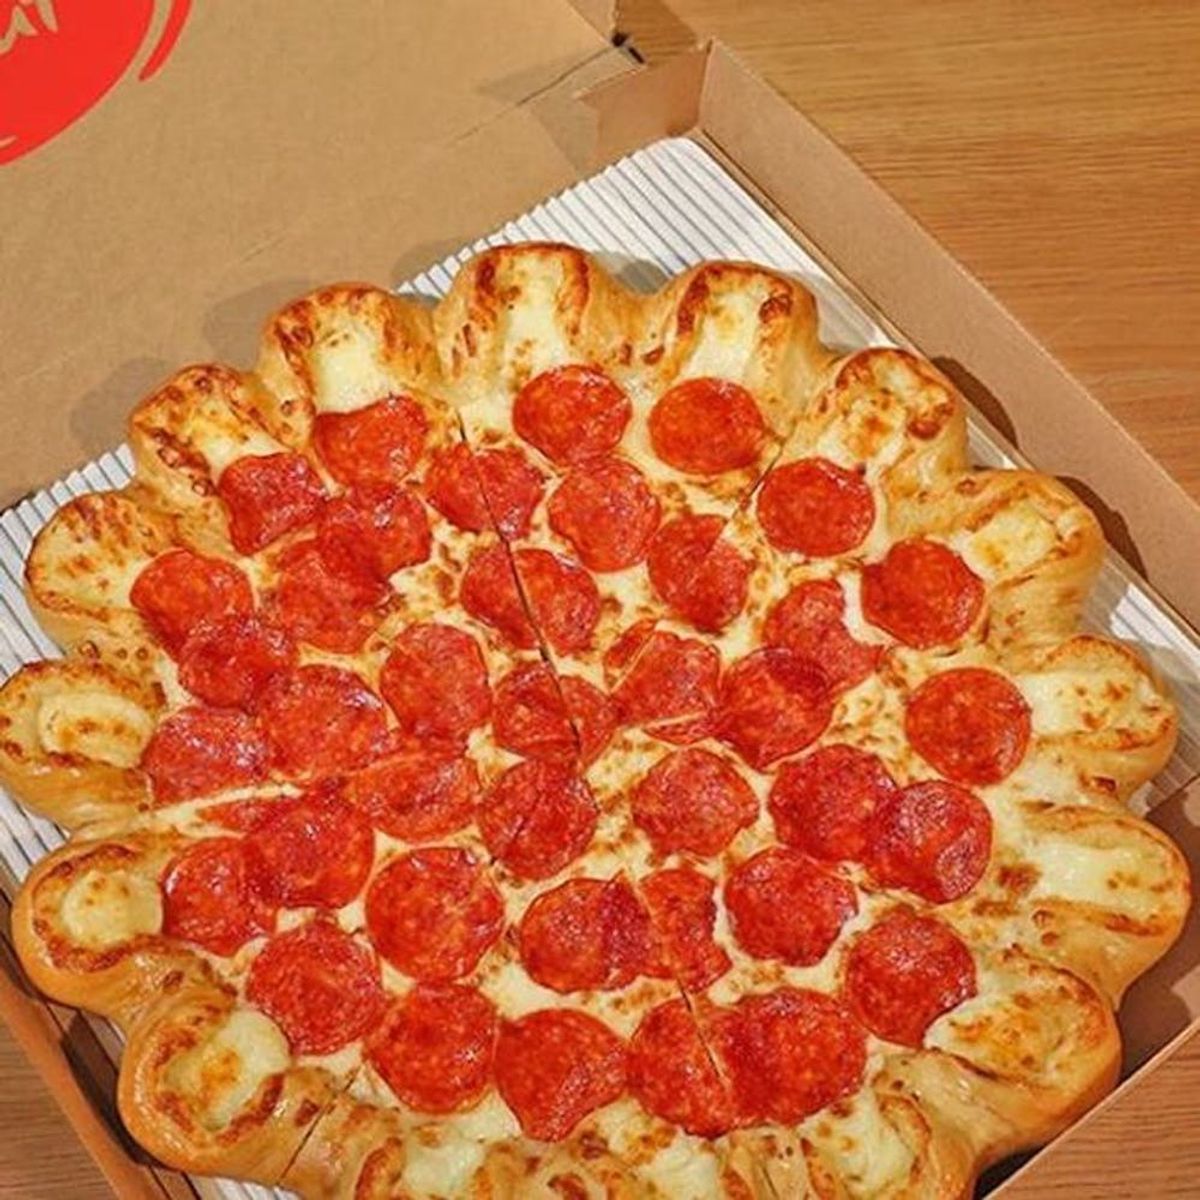 Pizza Hut Just Invented Its Cheesiest Pizza Crust Yet… and It Has POCKETS